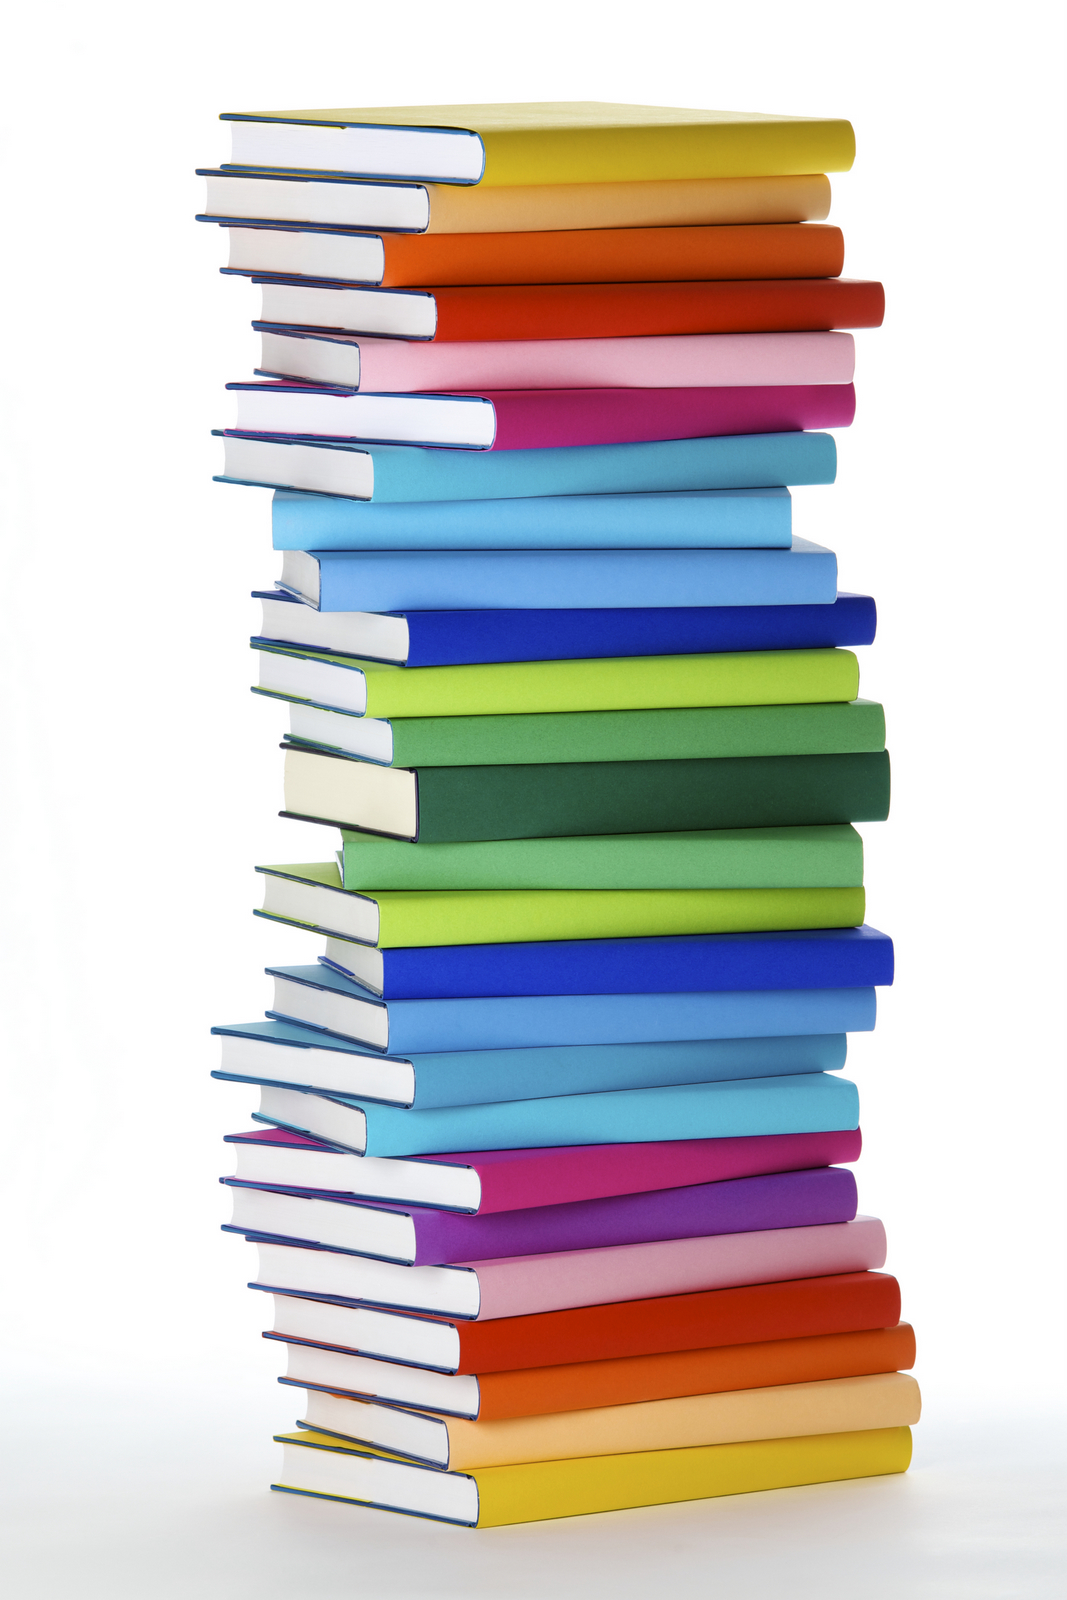 Stacks Of Books Images 